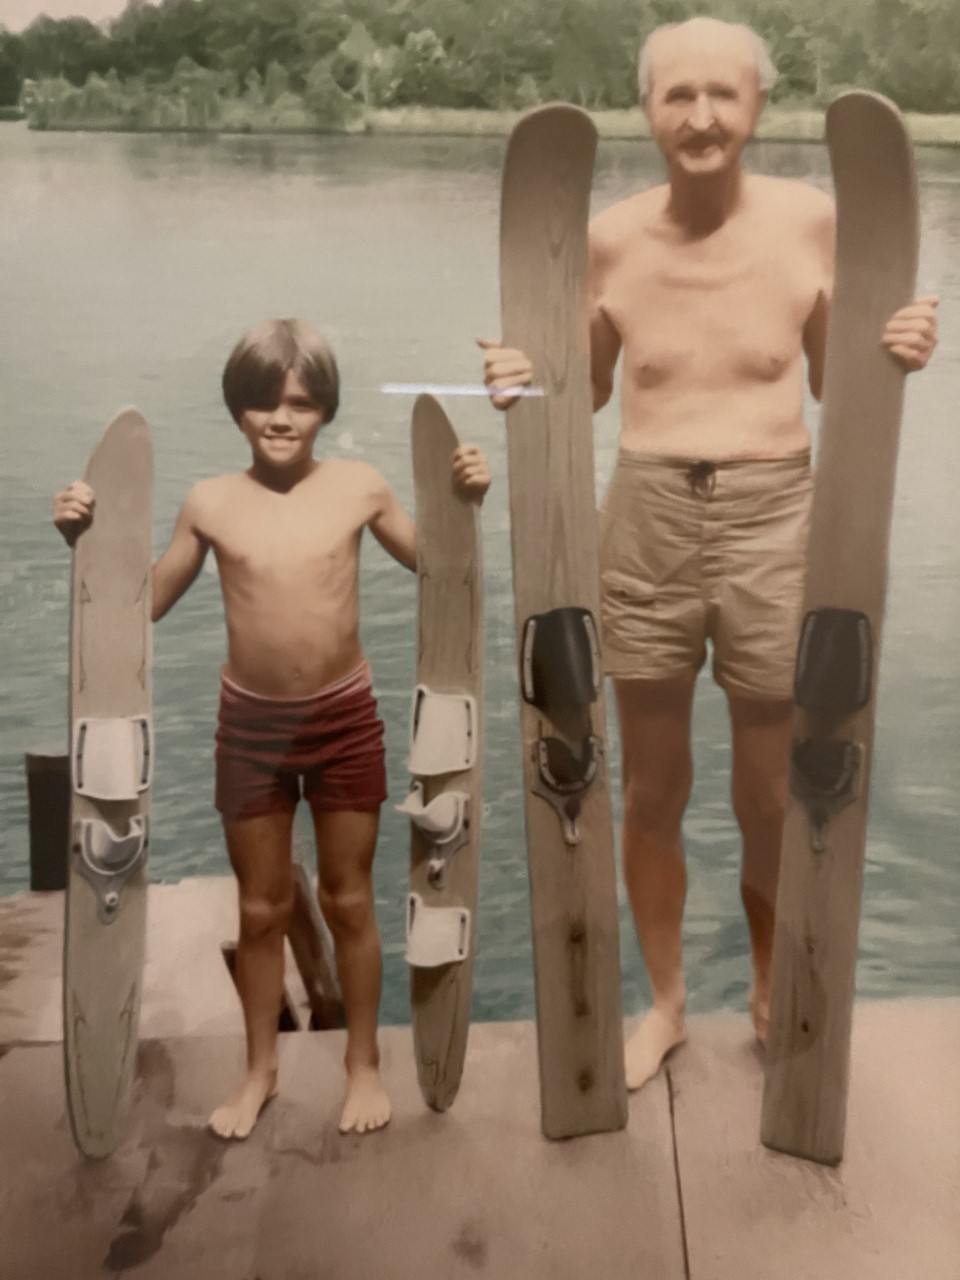 Jimmy's early career plans were to be a professional water skier.